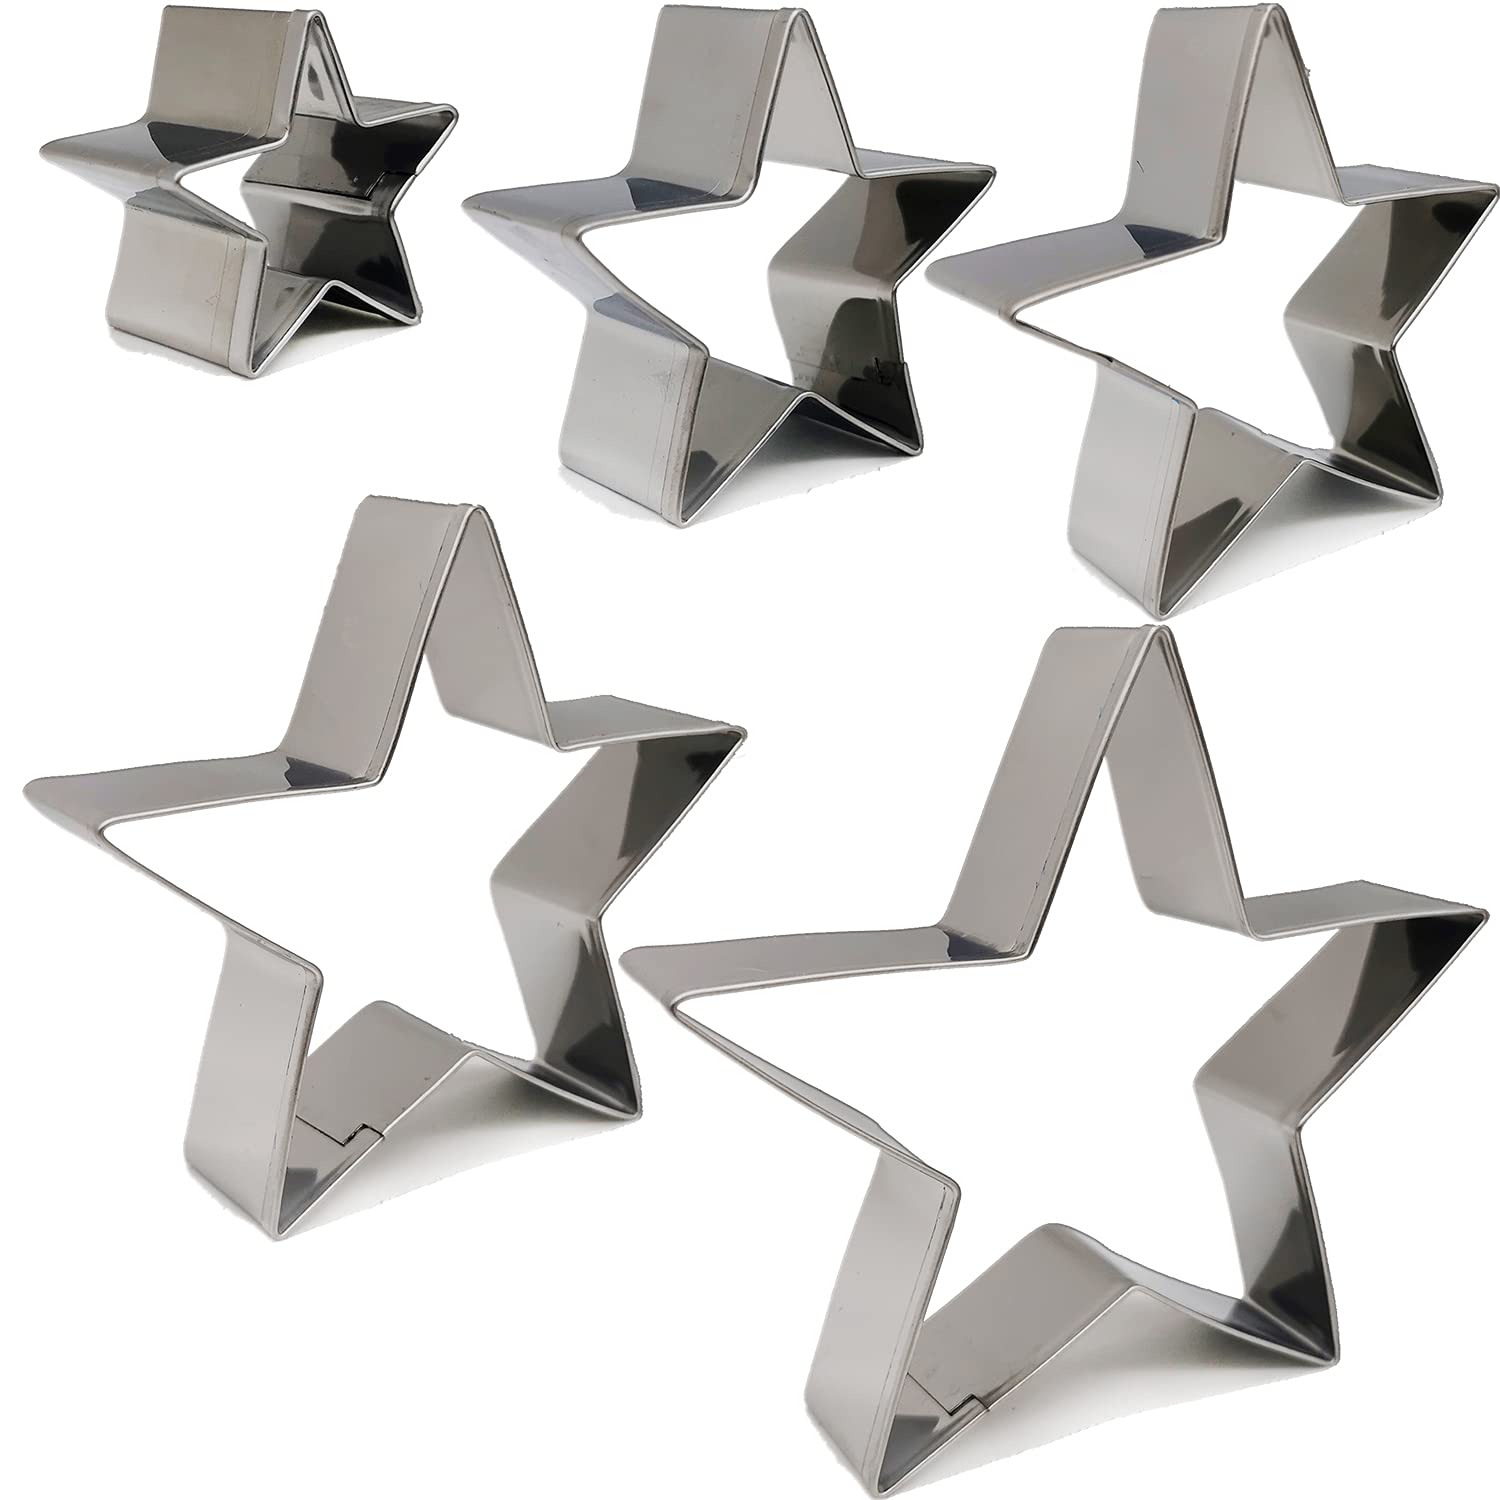 Vokop Star Cookie Cutter Set-5 Pack Stainless Steel Five-Pointed Star Biscuit Molds Fondant Cake Cookie Cutter Set Pastry Mold